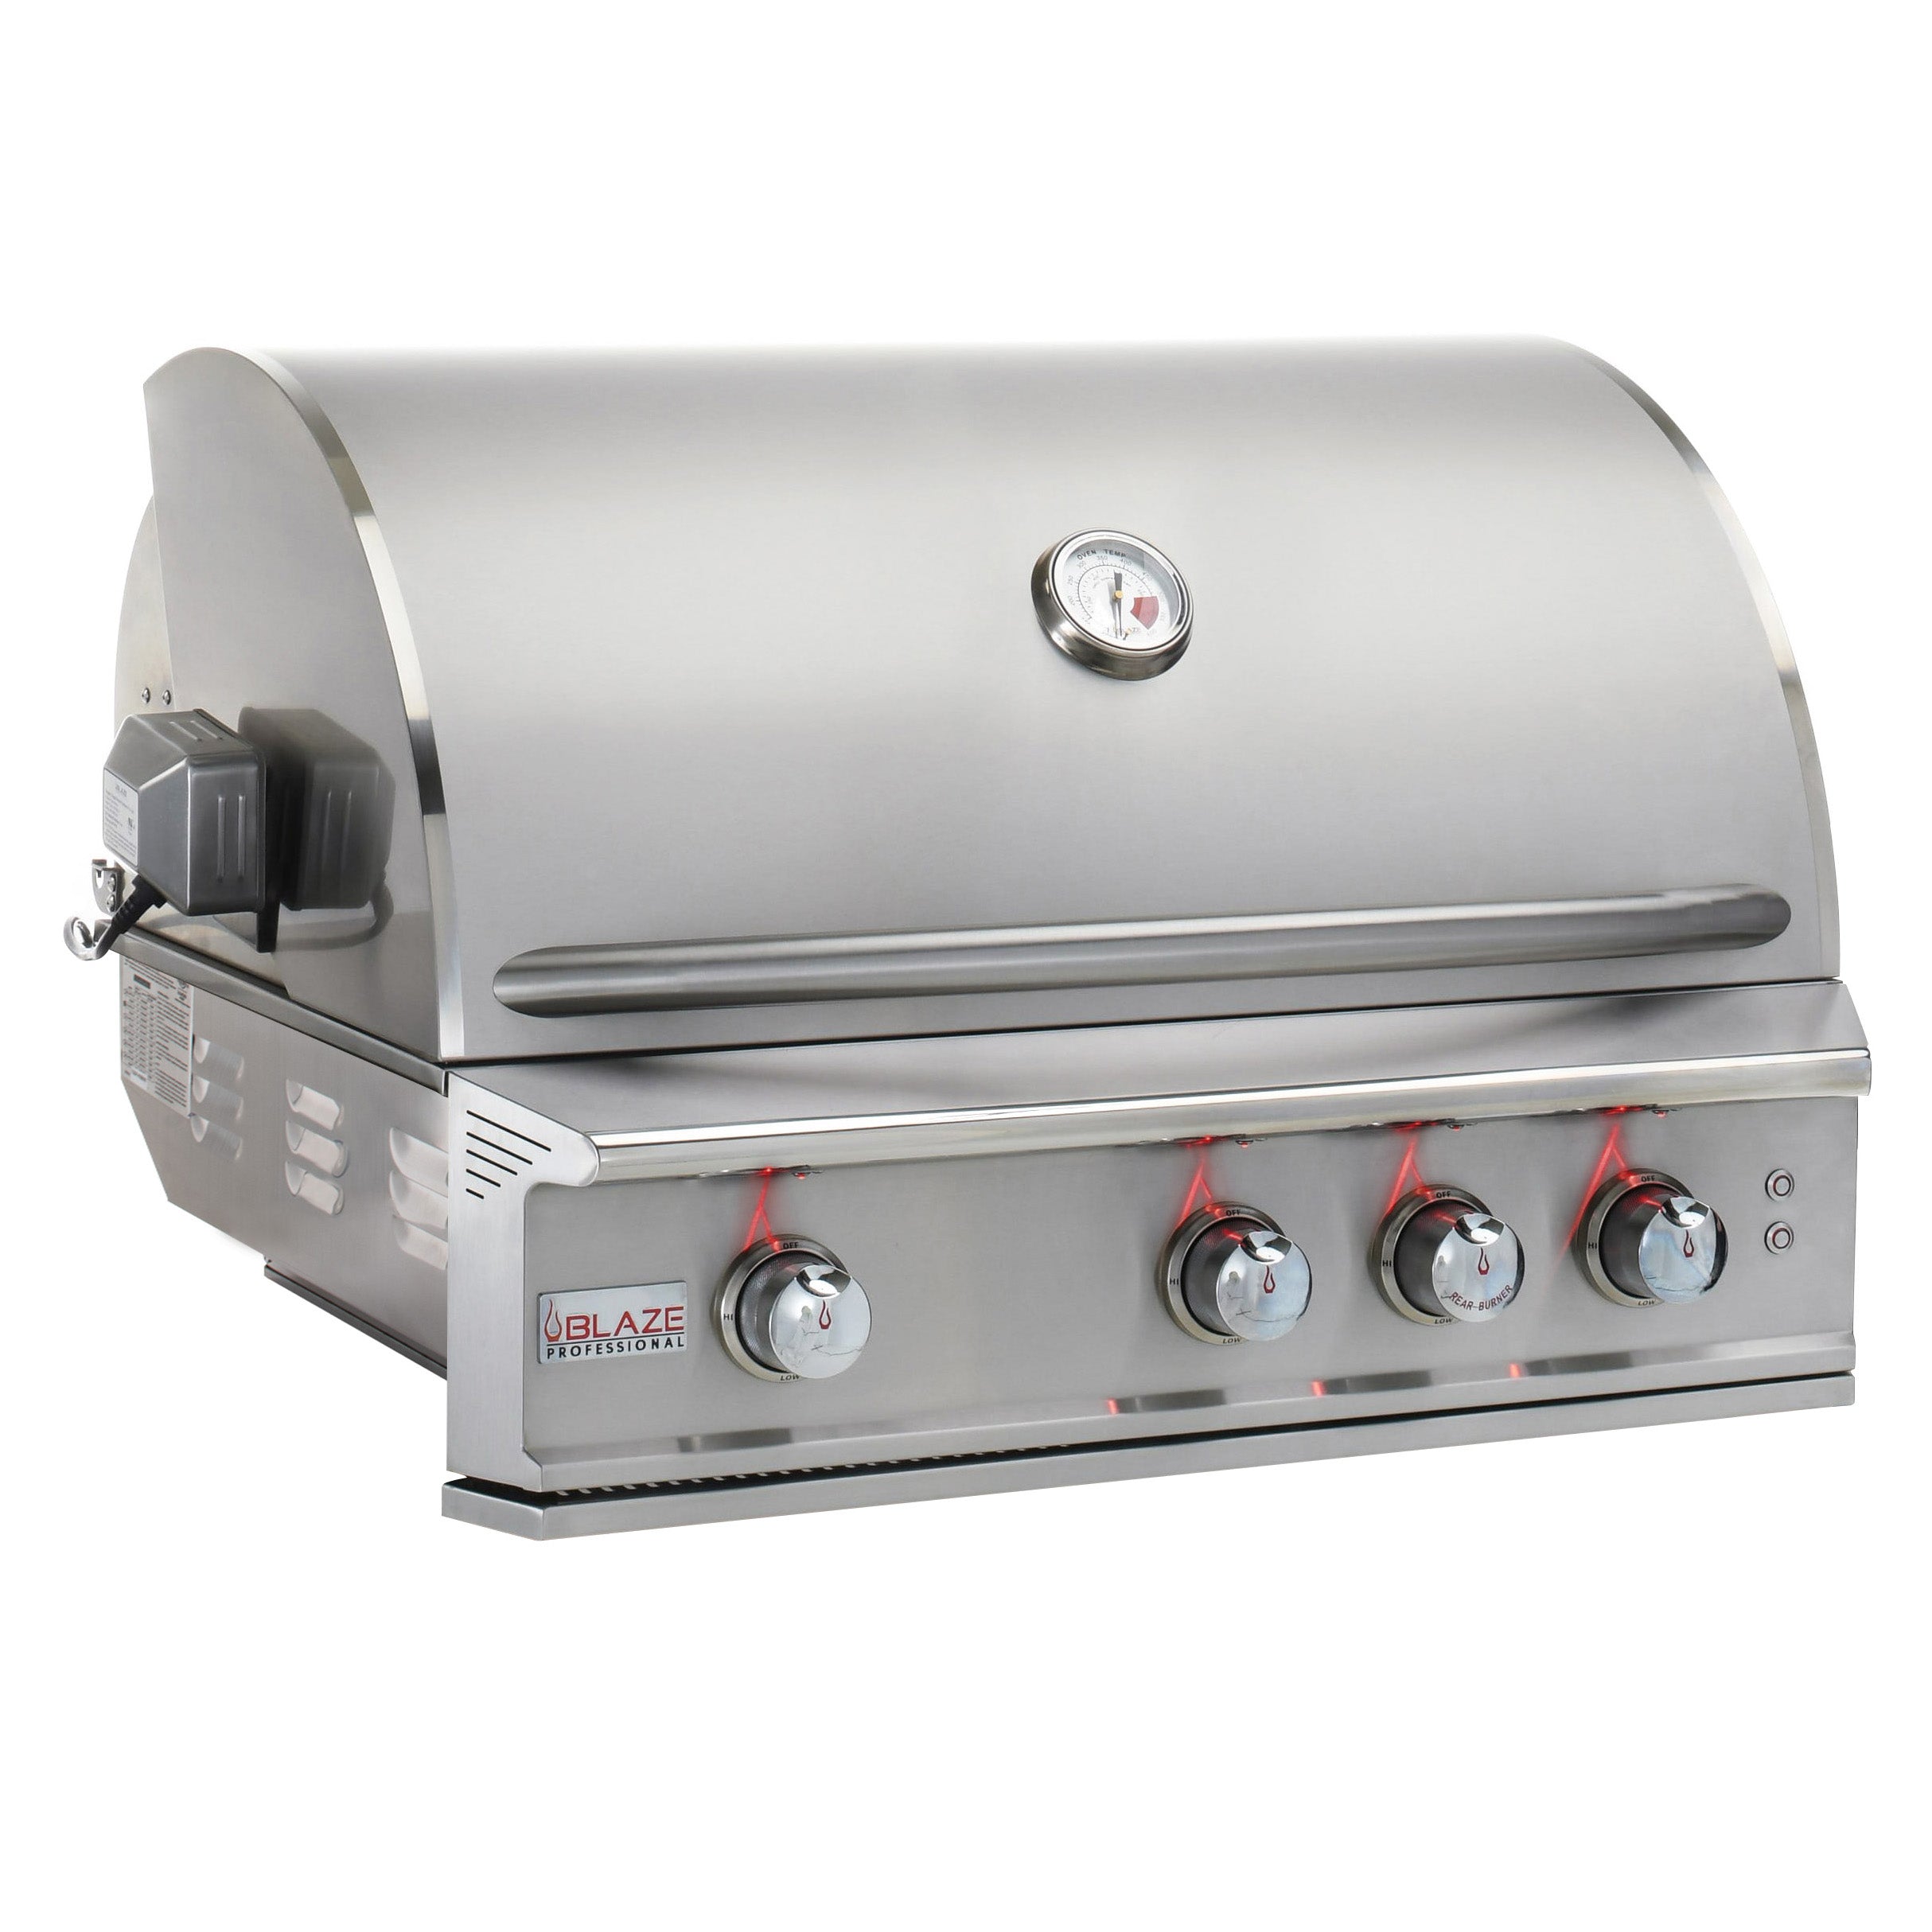 Blaze Professional LUX 34 inch 3 Burner Gas Grill with Rear Infrared Burner BLZ-3PRO